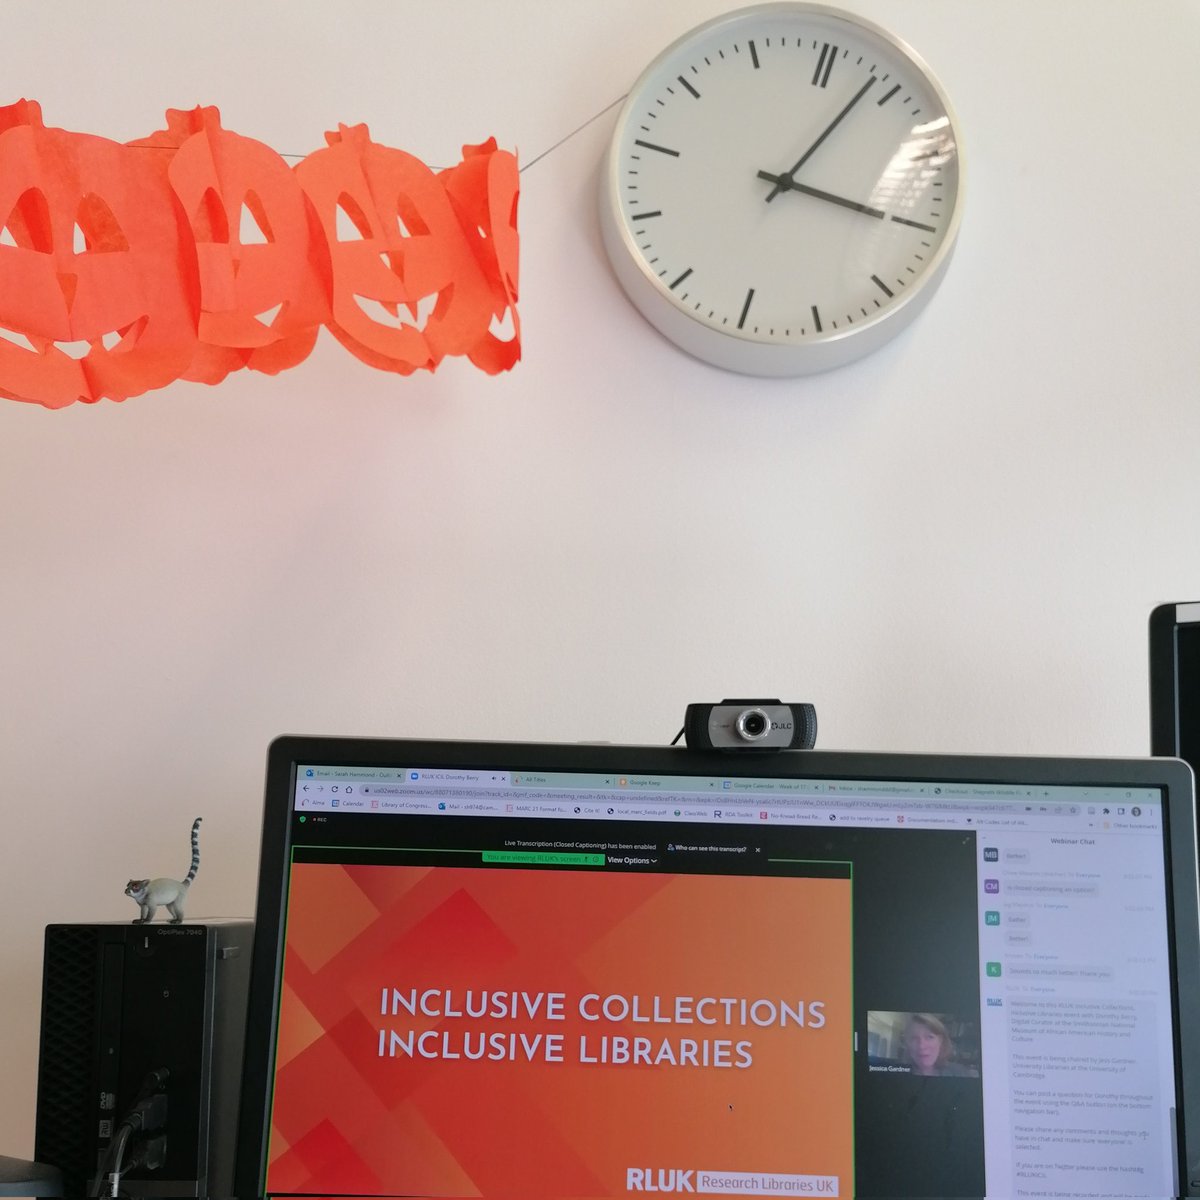 highly recommend matching your office decor to the webinar colour scheme #RLUKICIL